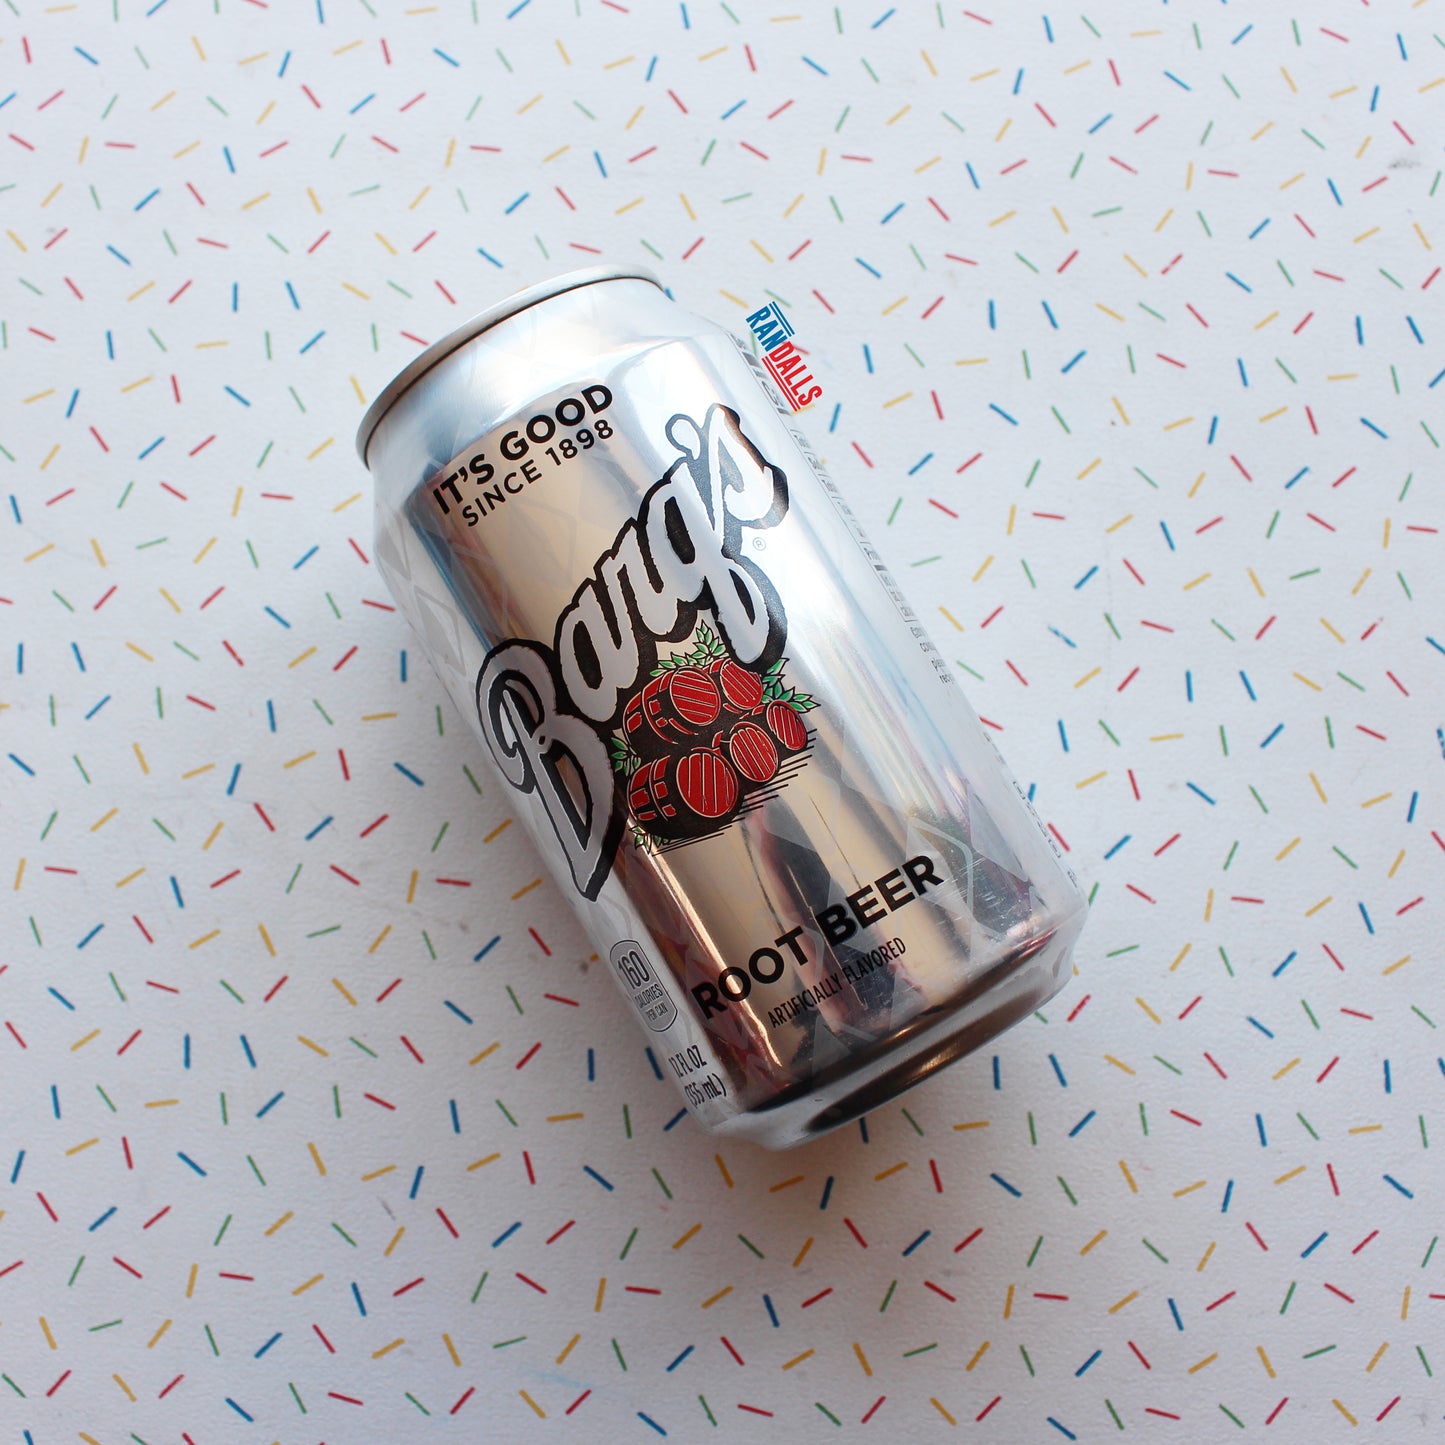 barqs root beer, soda, can, fizzy, pop, drink, usa, randalls